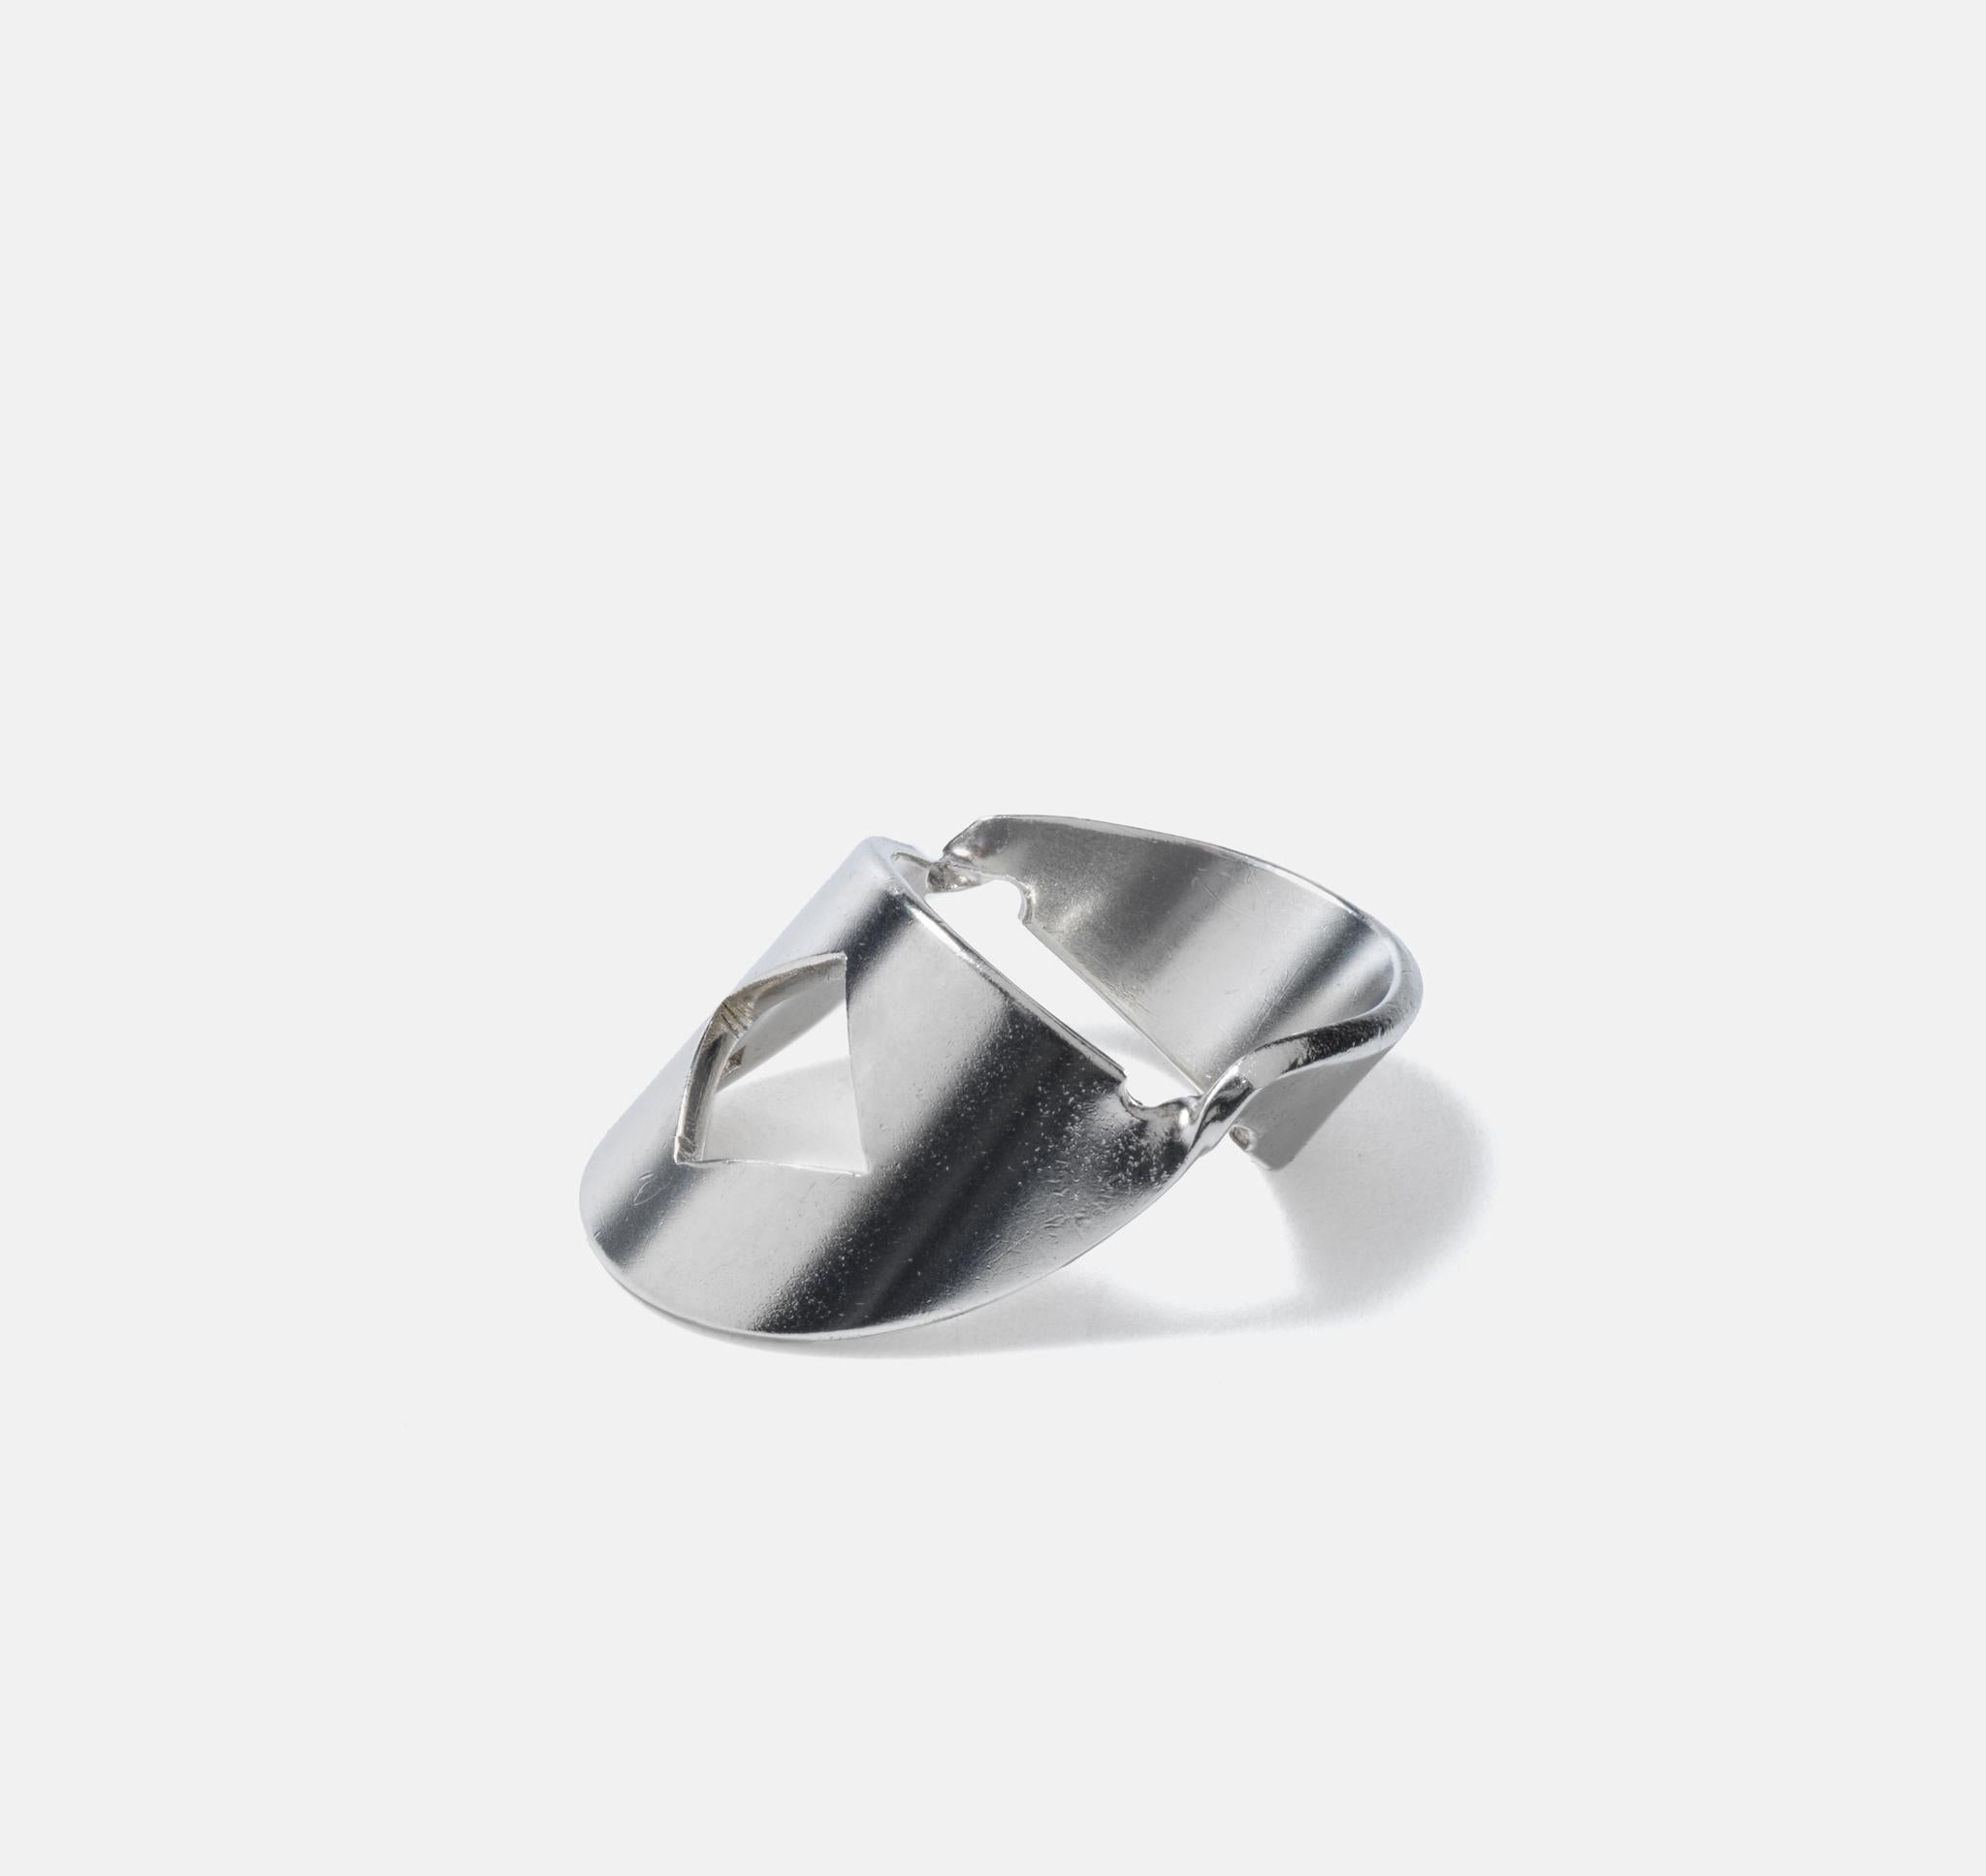 A modernistic design typical for Sigurd Persson. He was one of Swedens most influential designers from the 1950s and onwards. This is really a quote simple ring but yet so refined.